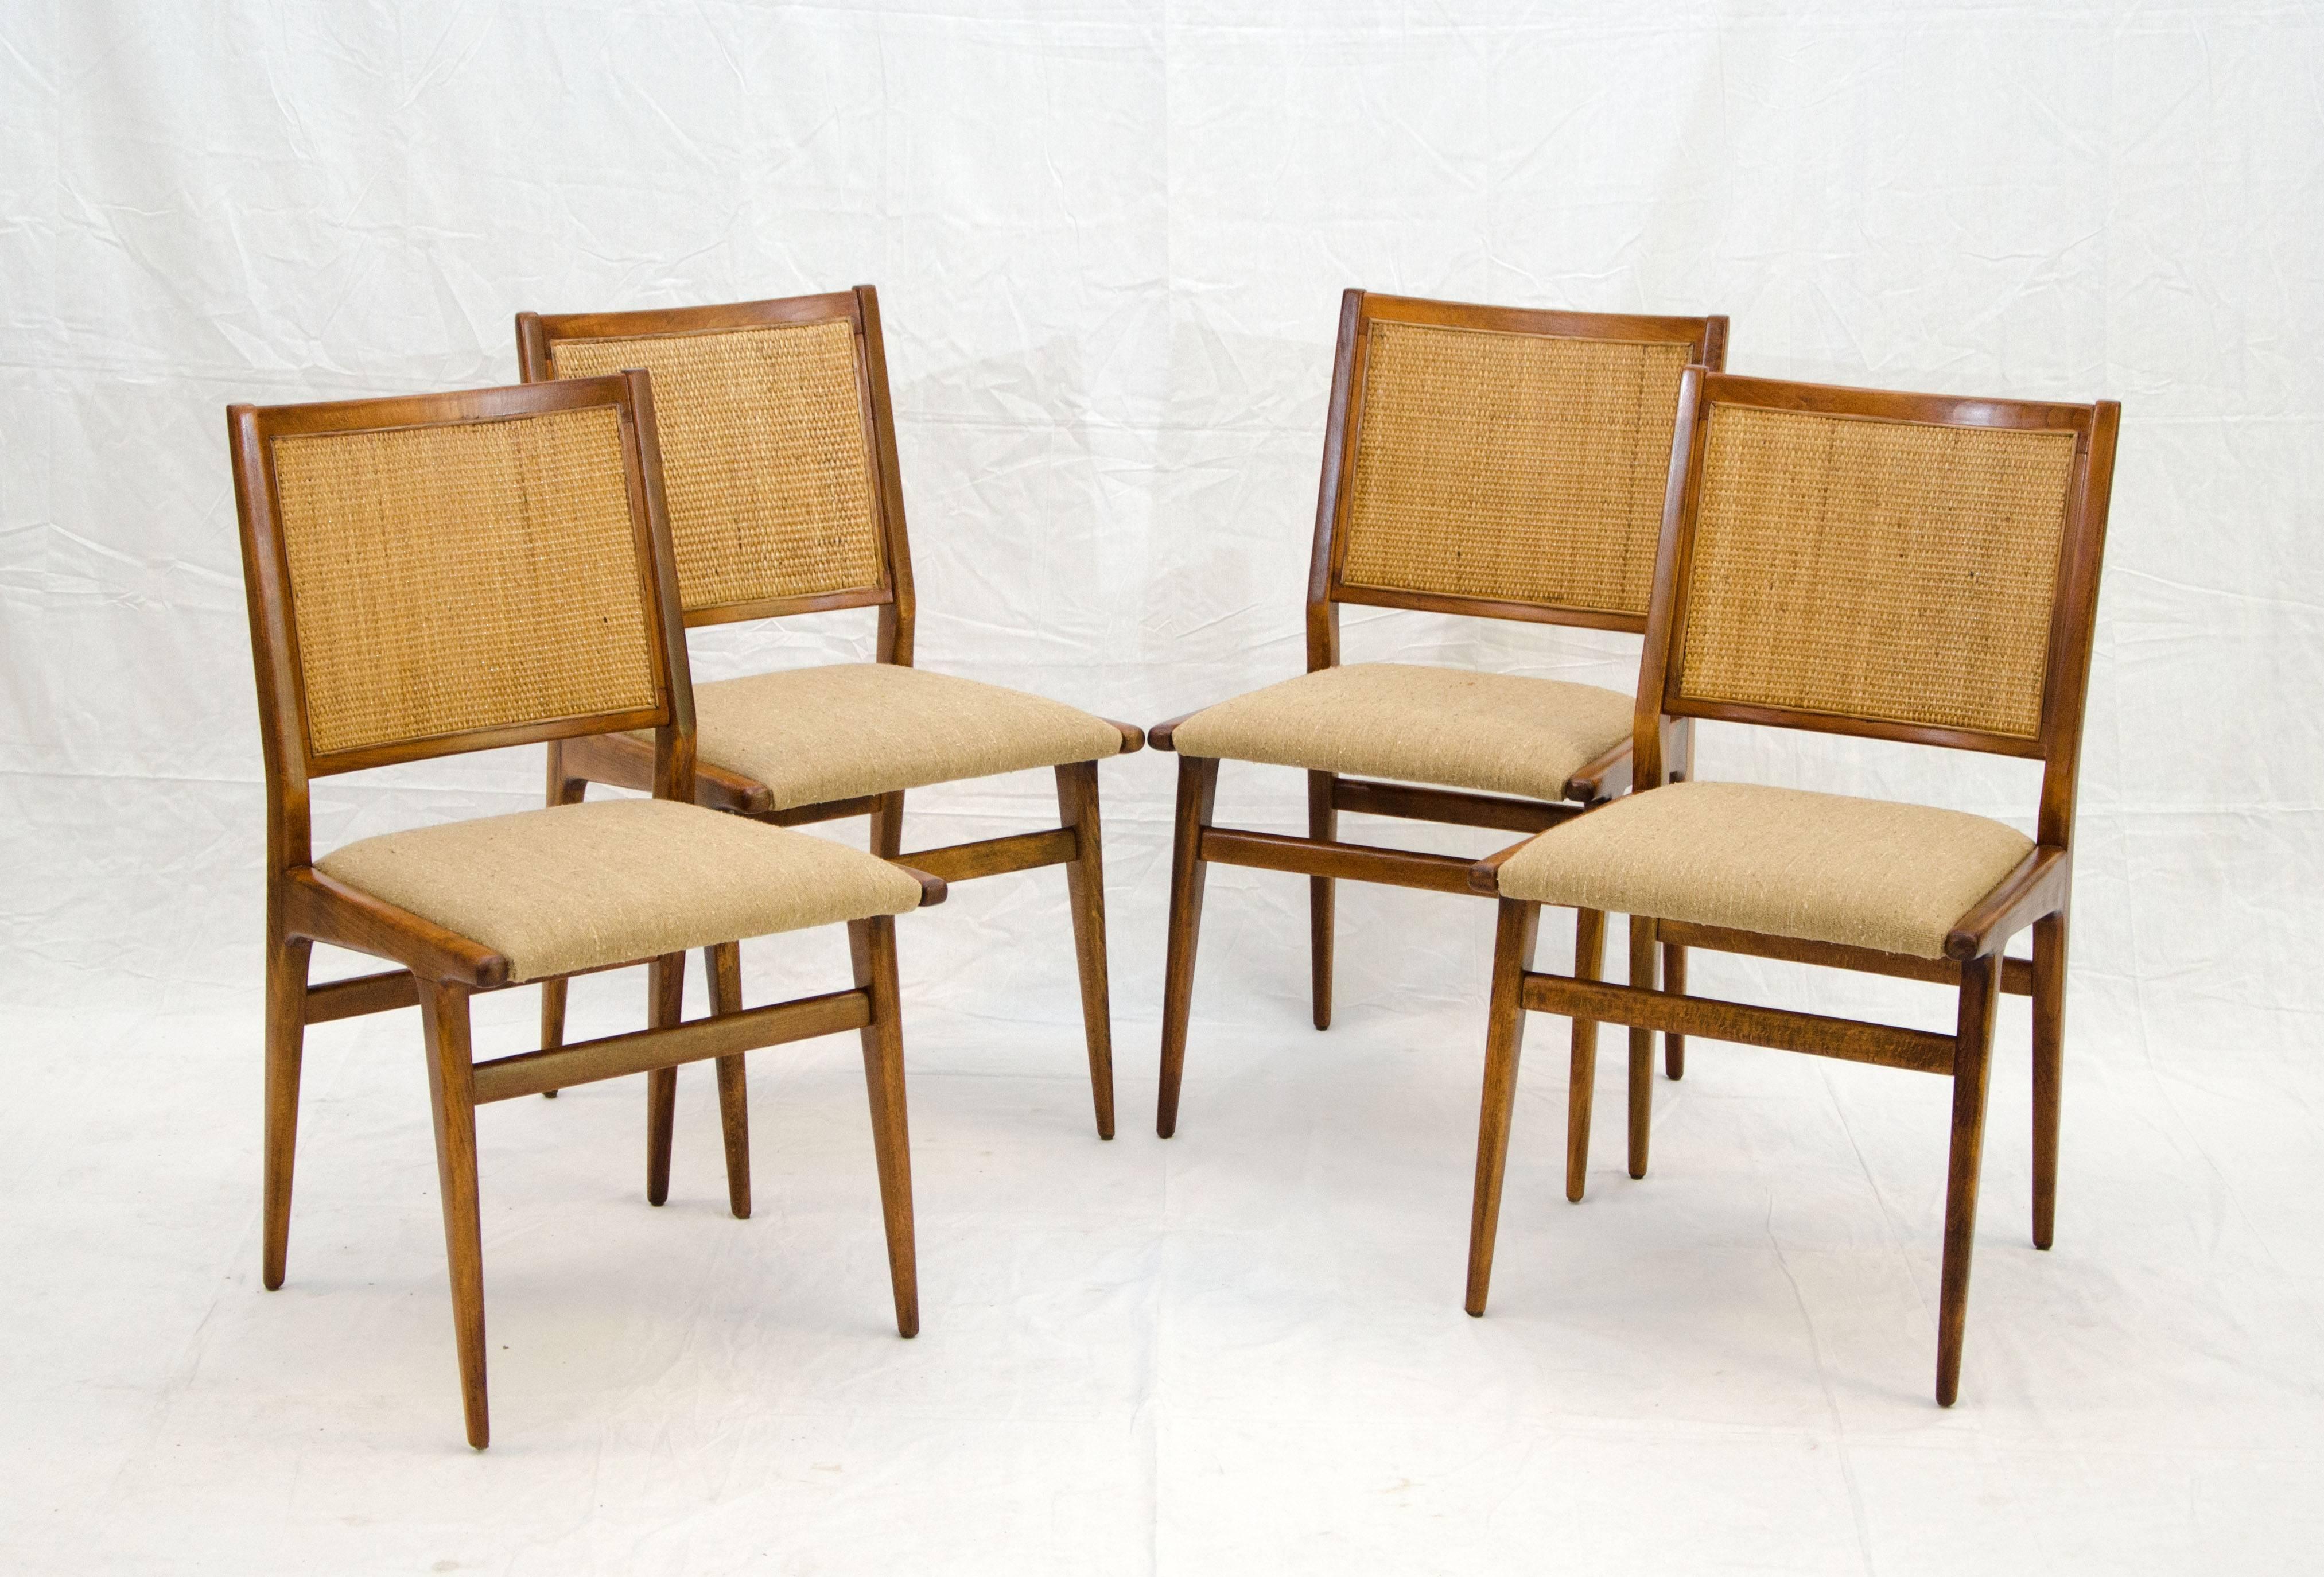 Beautiful set of four Jens Risom dining chairs. The caned backs are original. The seat design is very angular and the birch chair frames were restored with a very light walnut finish. The new light sand colored upholstery offsets both the cane and